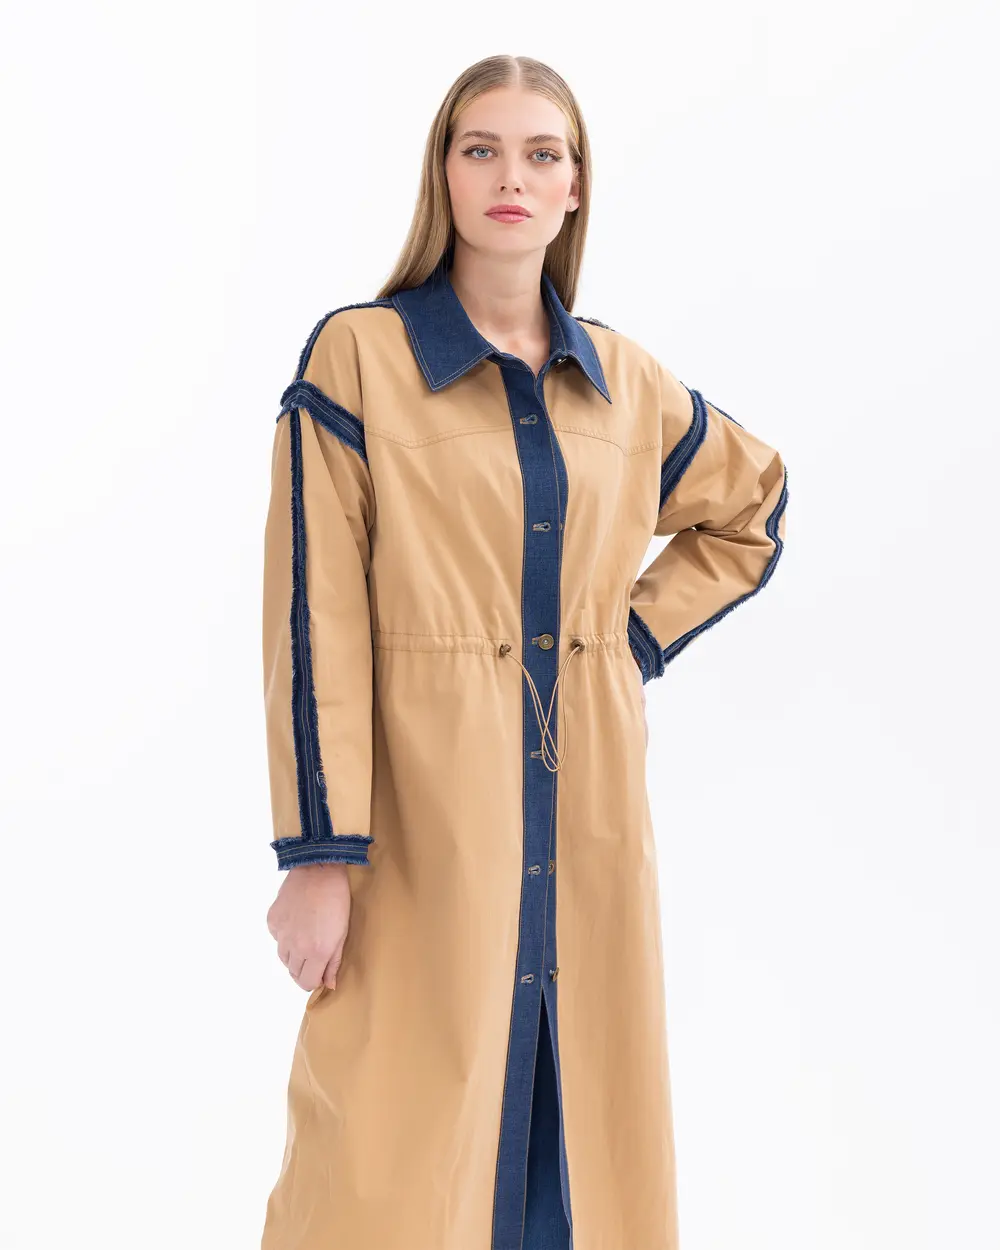 Buttoned Trench Coat with Drawstring Waist and Pocket Details